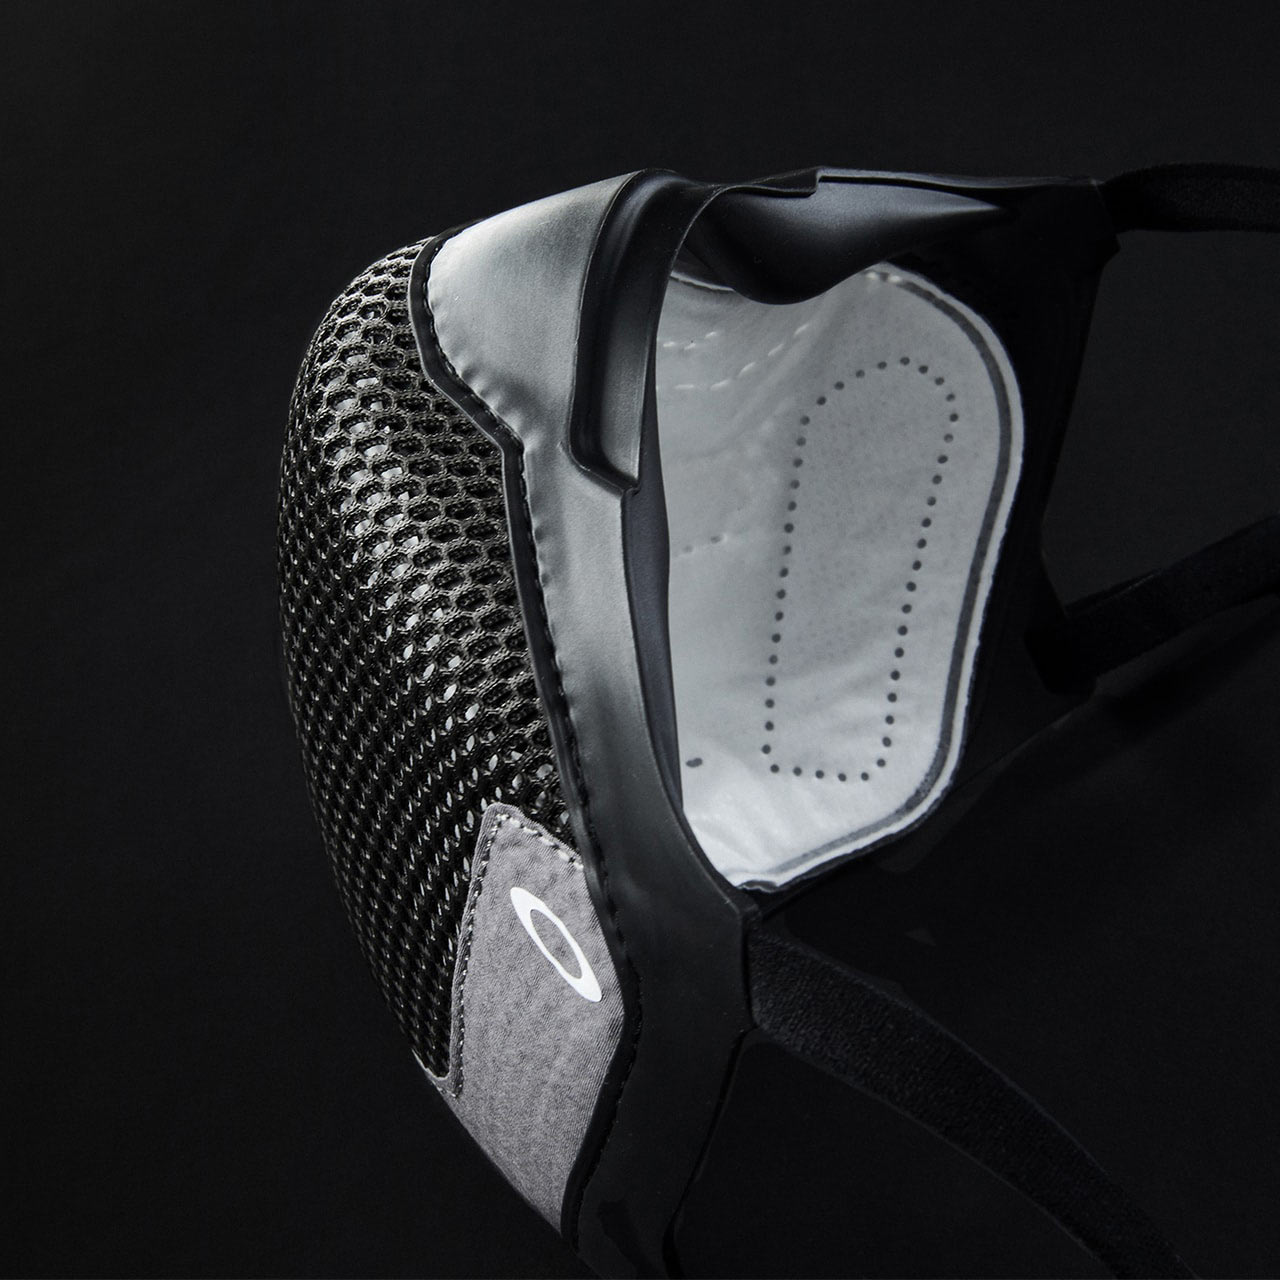 Oakley MSK3 unveils fashionably protective face mask that works with  sunglasses - Bikerumor